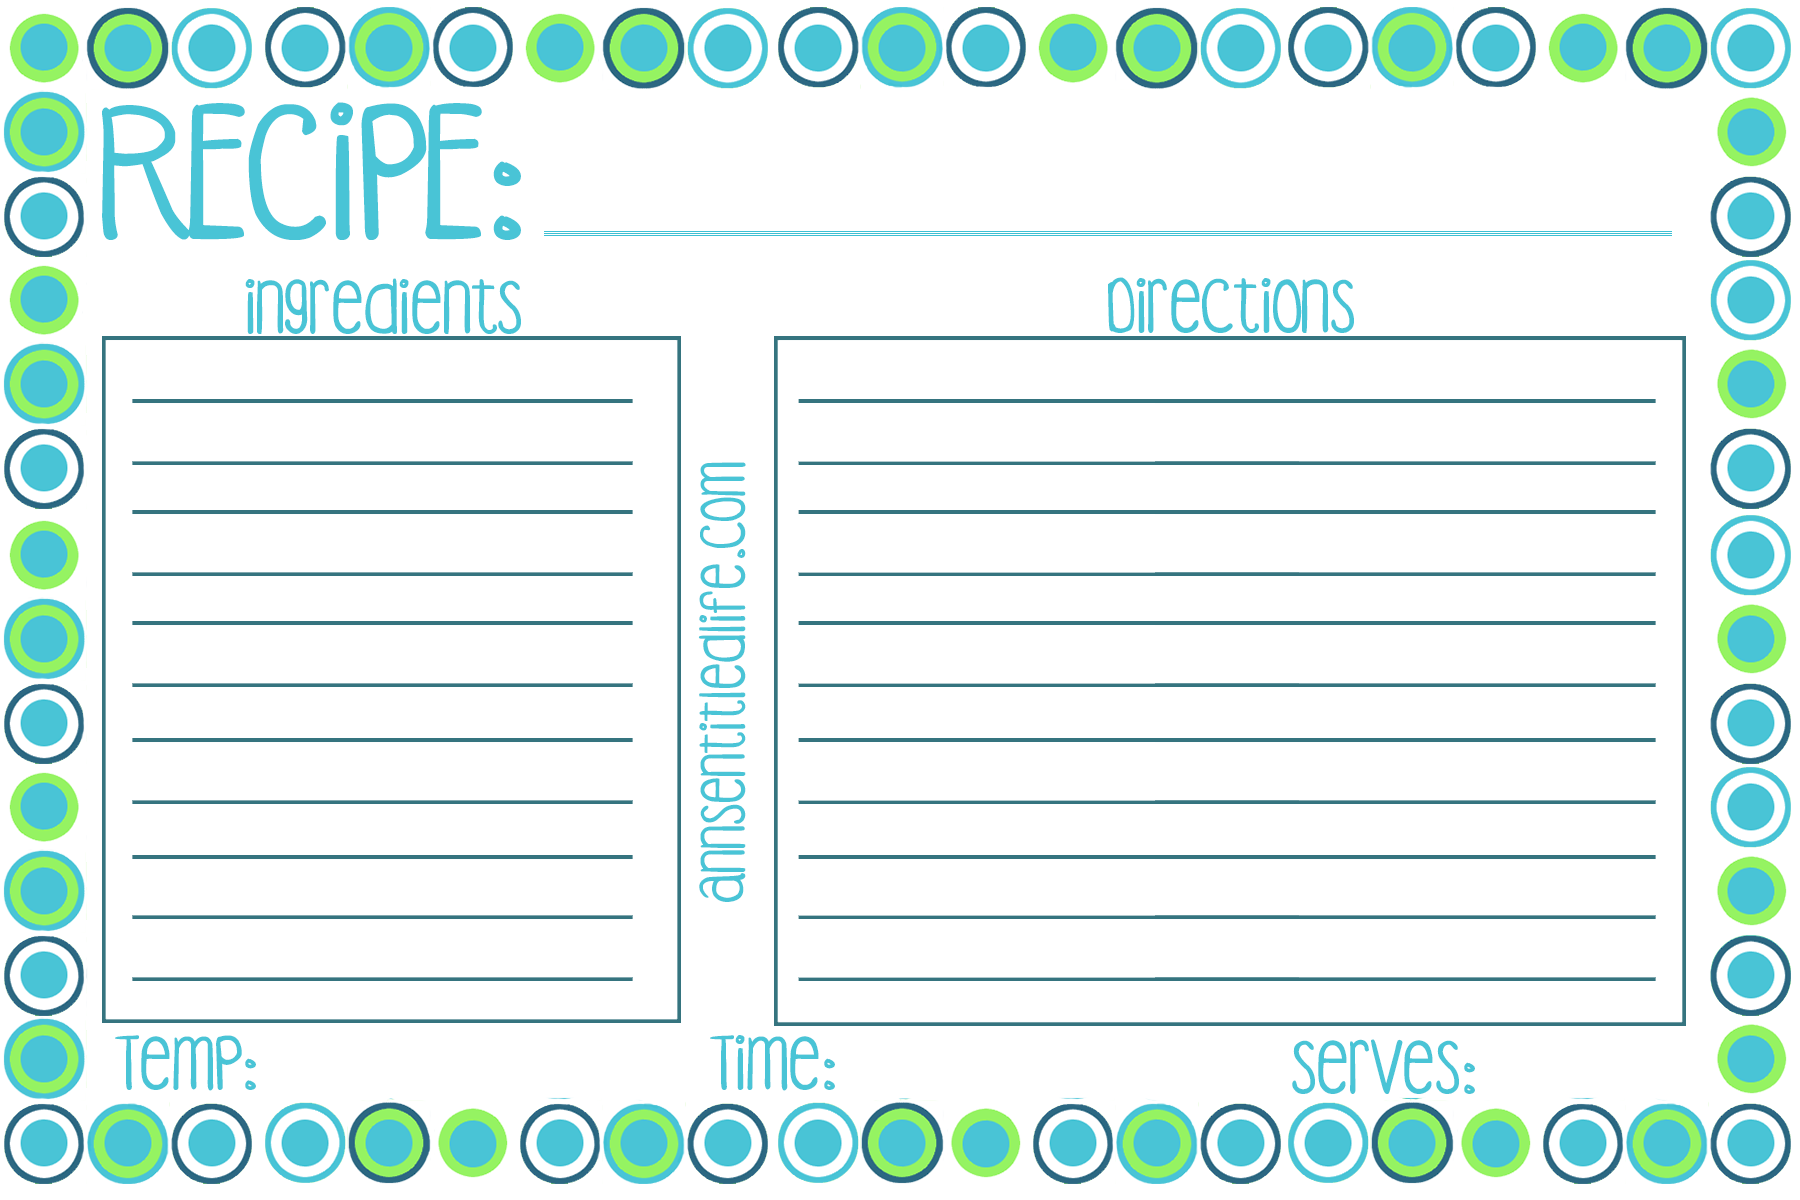 Free Downloadable Printable Recipe Cards